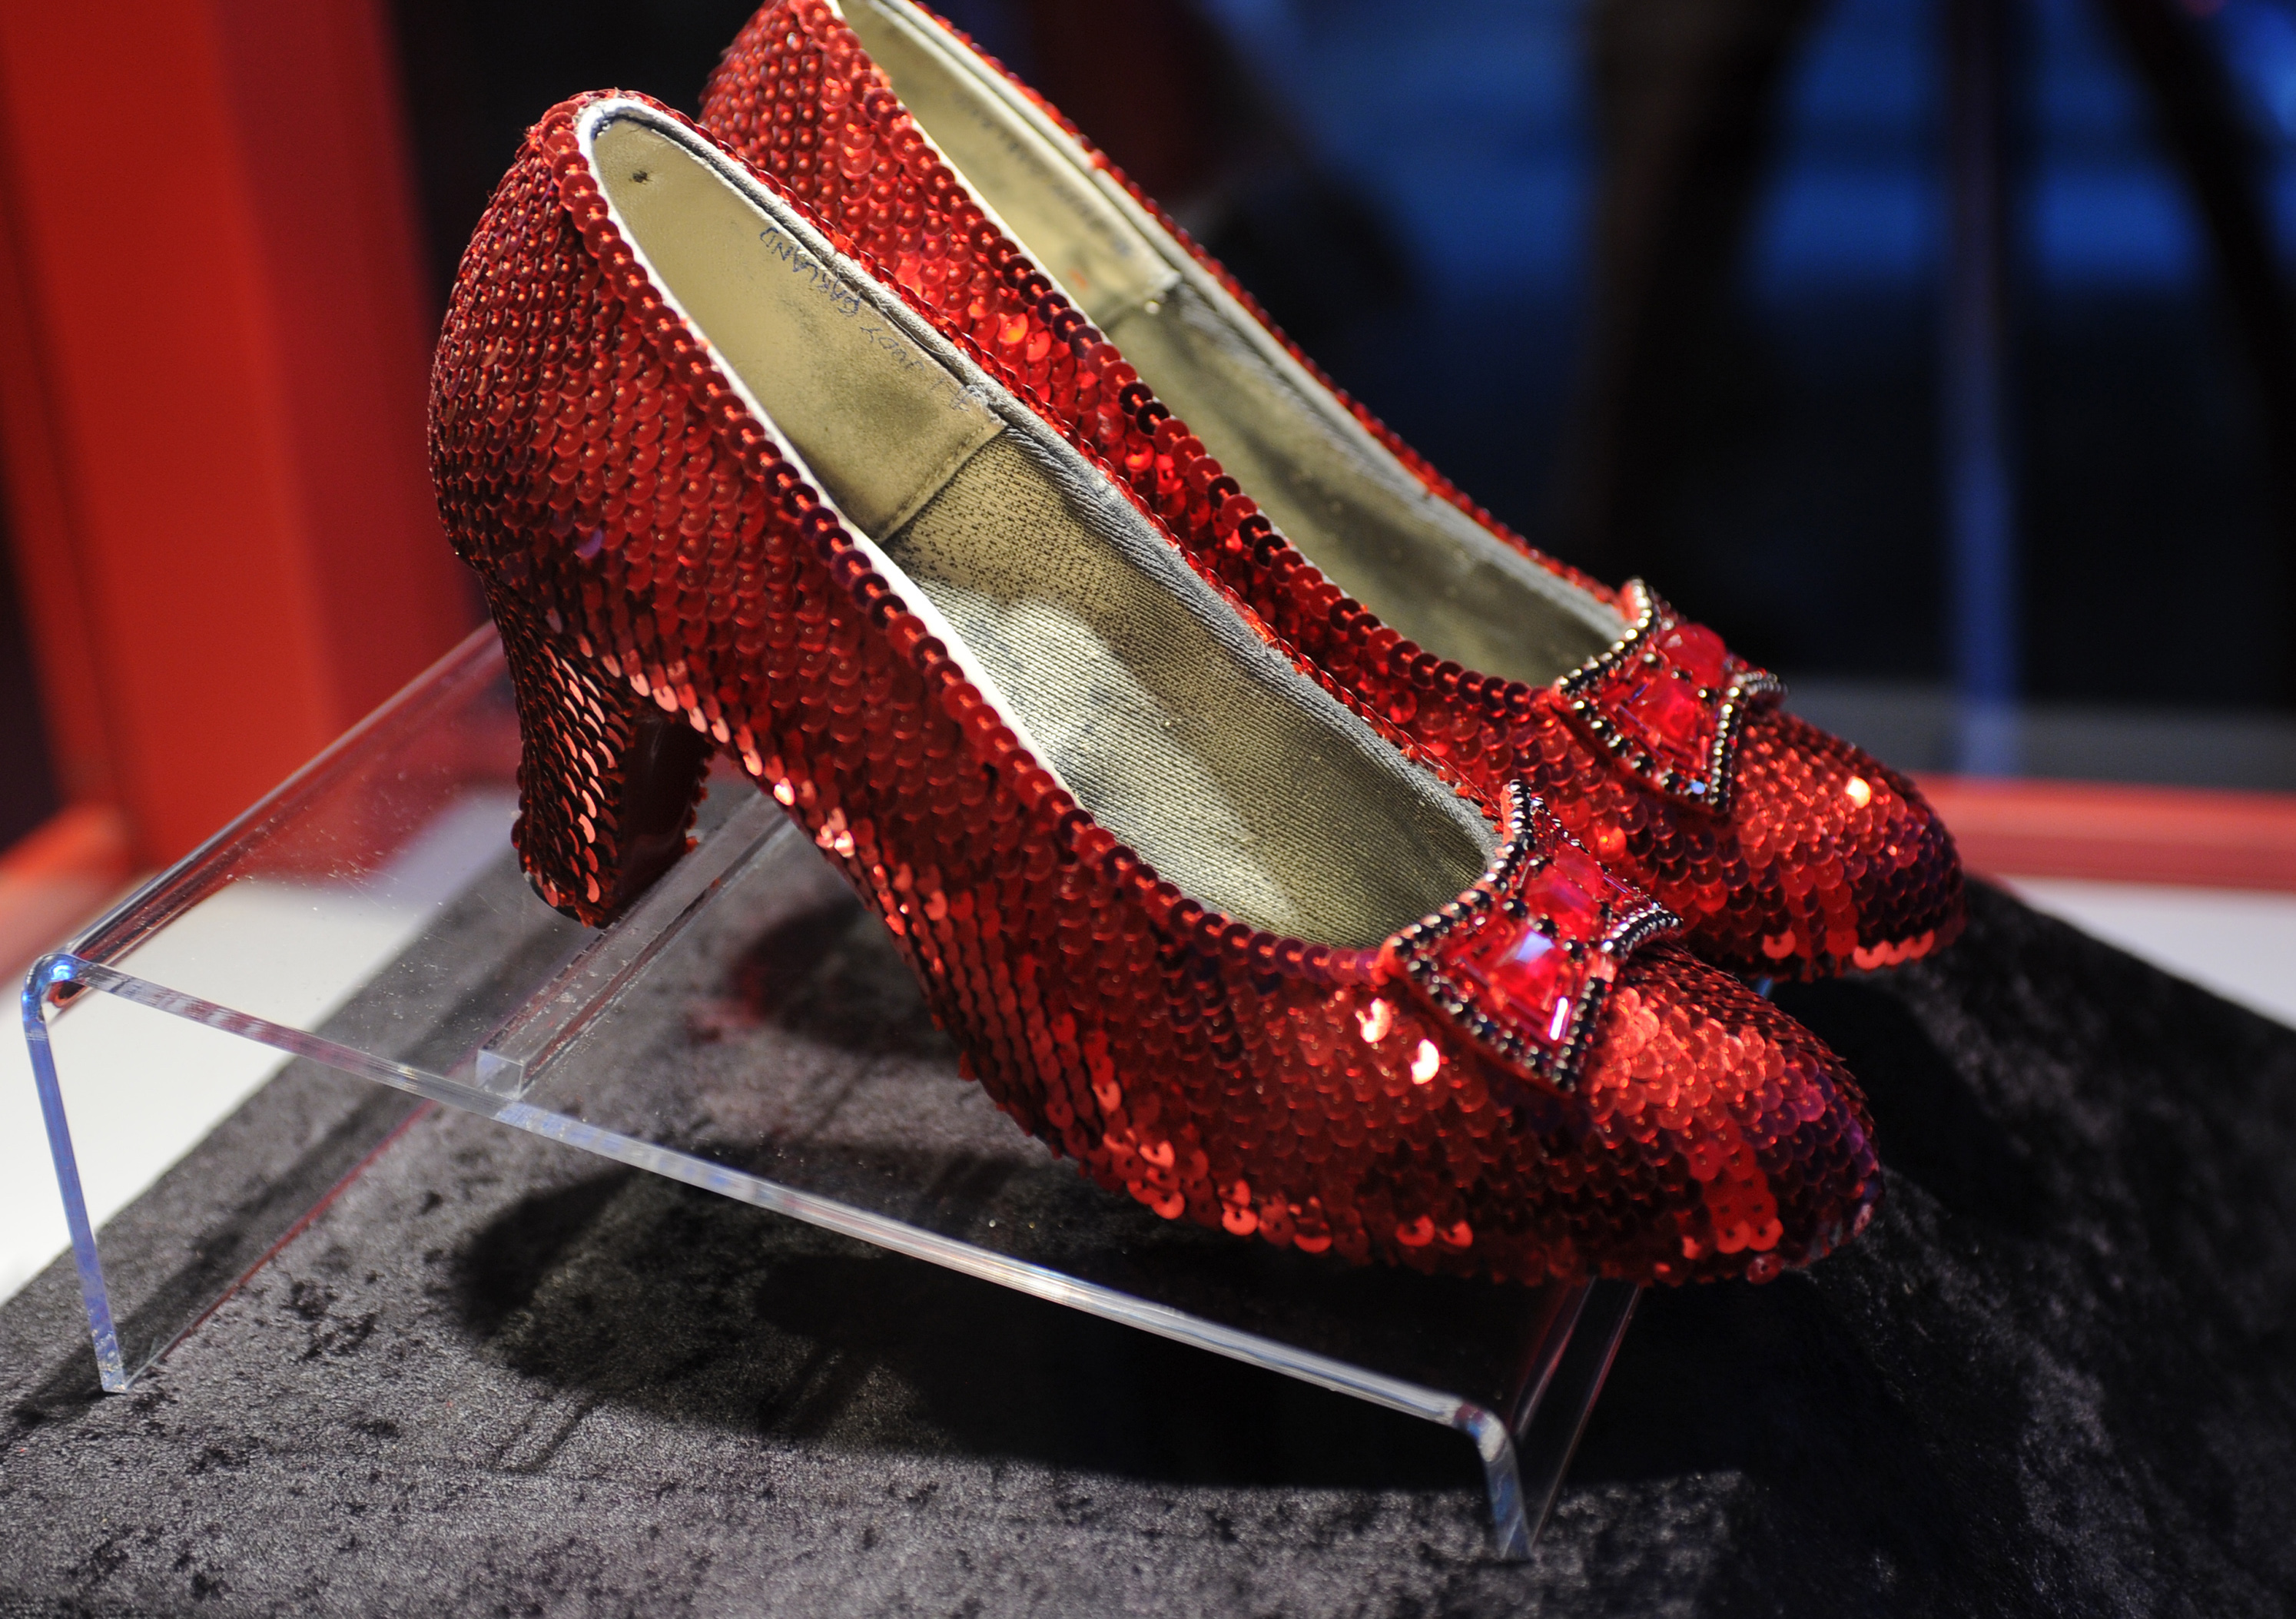 Missing Pair Of Dorothy's Ruby Red Slippers From The Wizard Of Oz Found  After A Decade